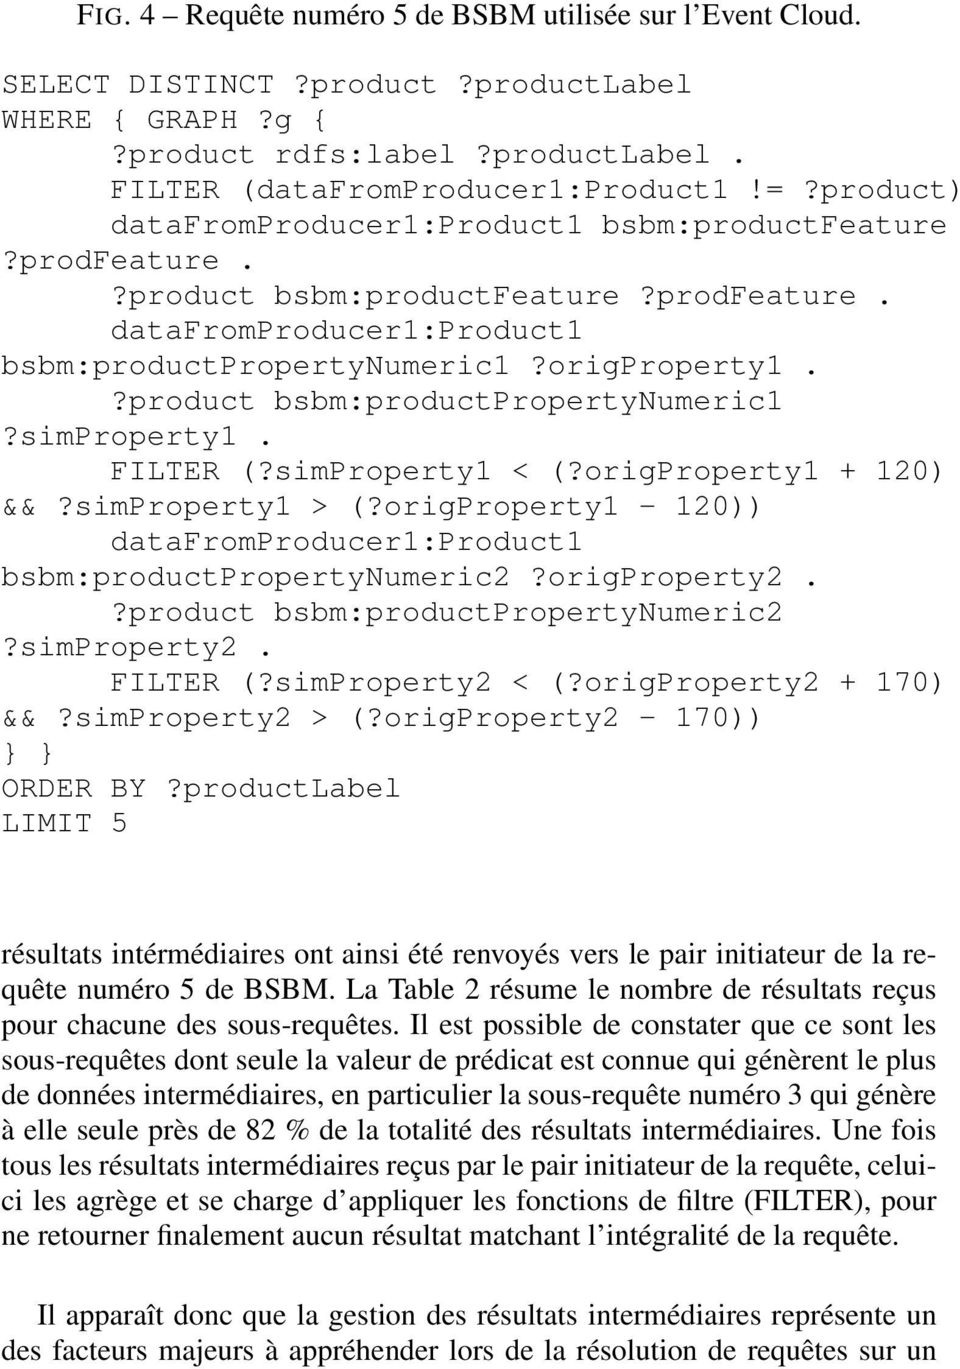 ?product bsbm:productpropertynumeric1?simproperty1. FILTER (?simproperty1 < (?origproperty1 + 120) &&?simproperty1 > (?origproperty1-120)) datafromproducer1:product1 bsbm:productpropertynumeric2?